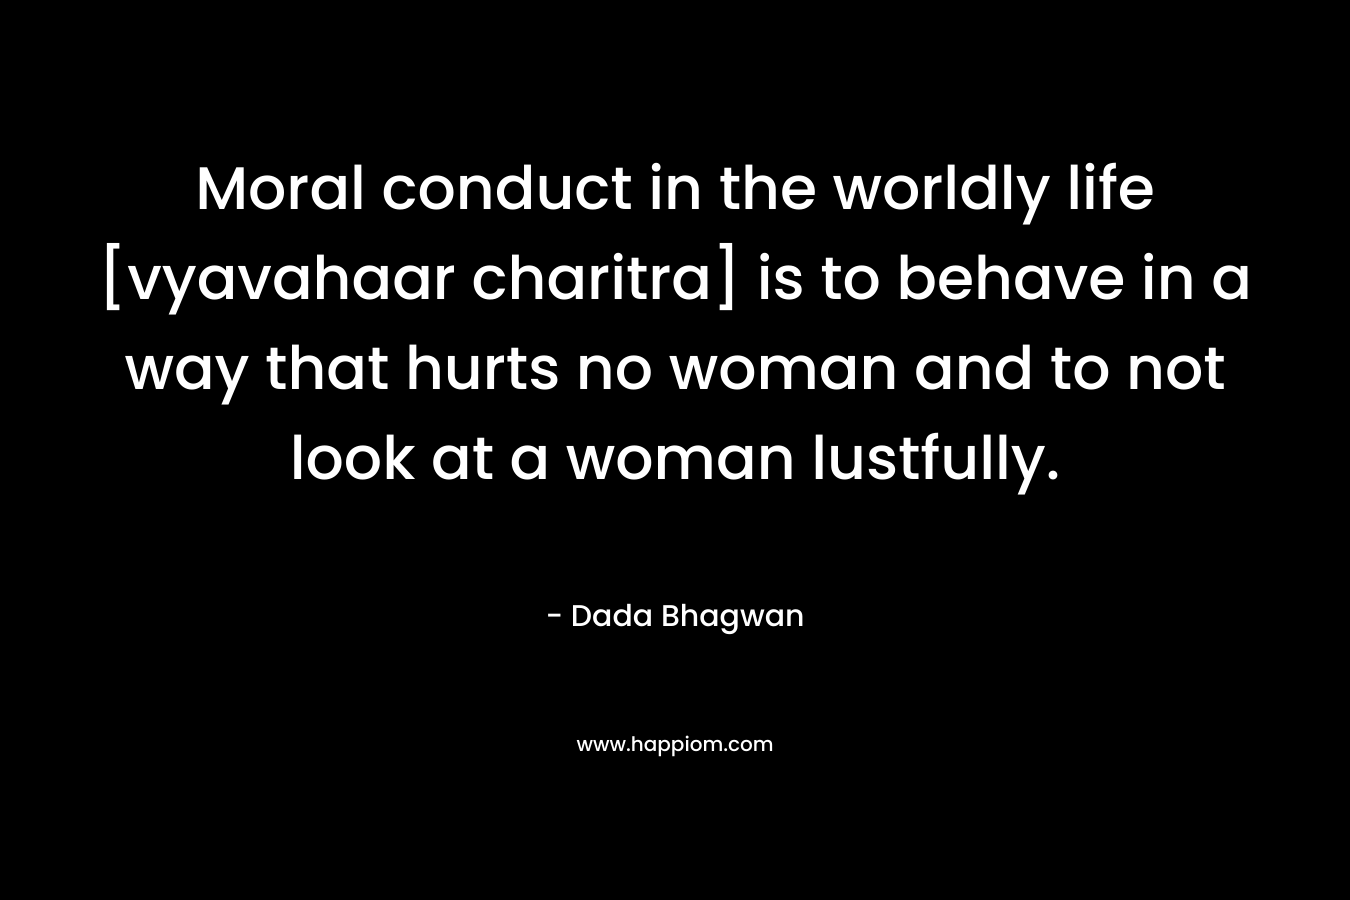 Moral conduct in the worldly life [vyavahaar charitra] is to behave in a way that hurts no woman and to not look at a woman lustfully.